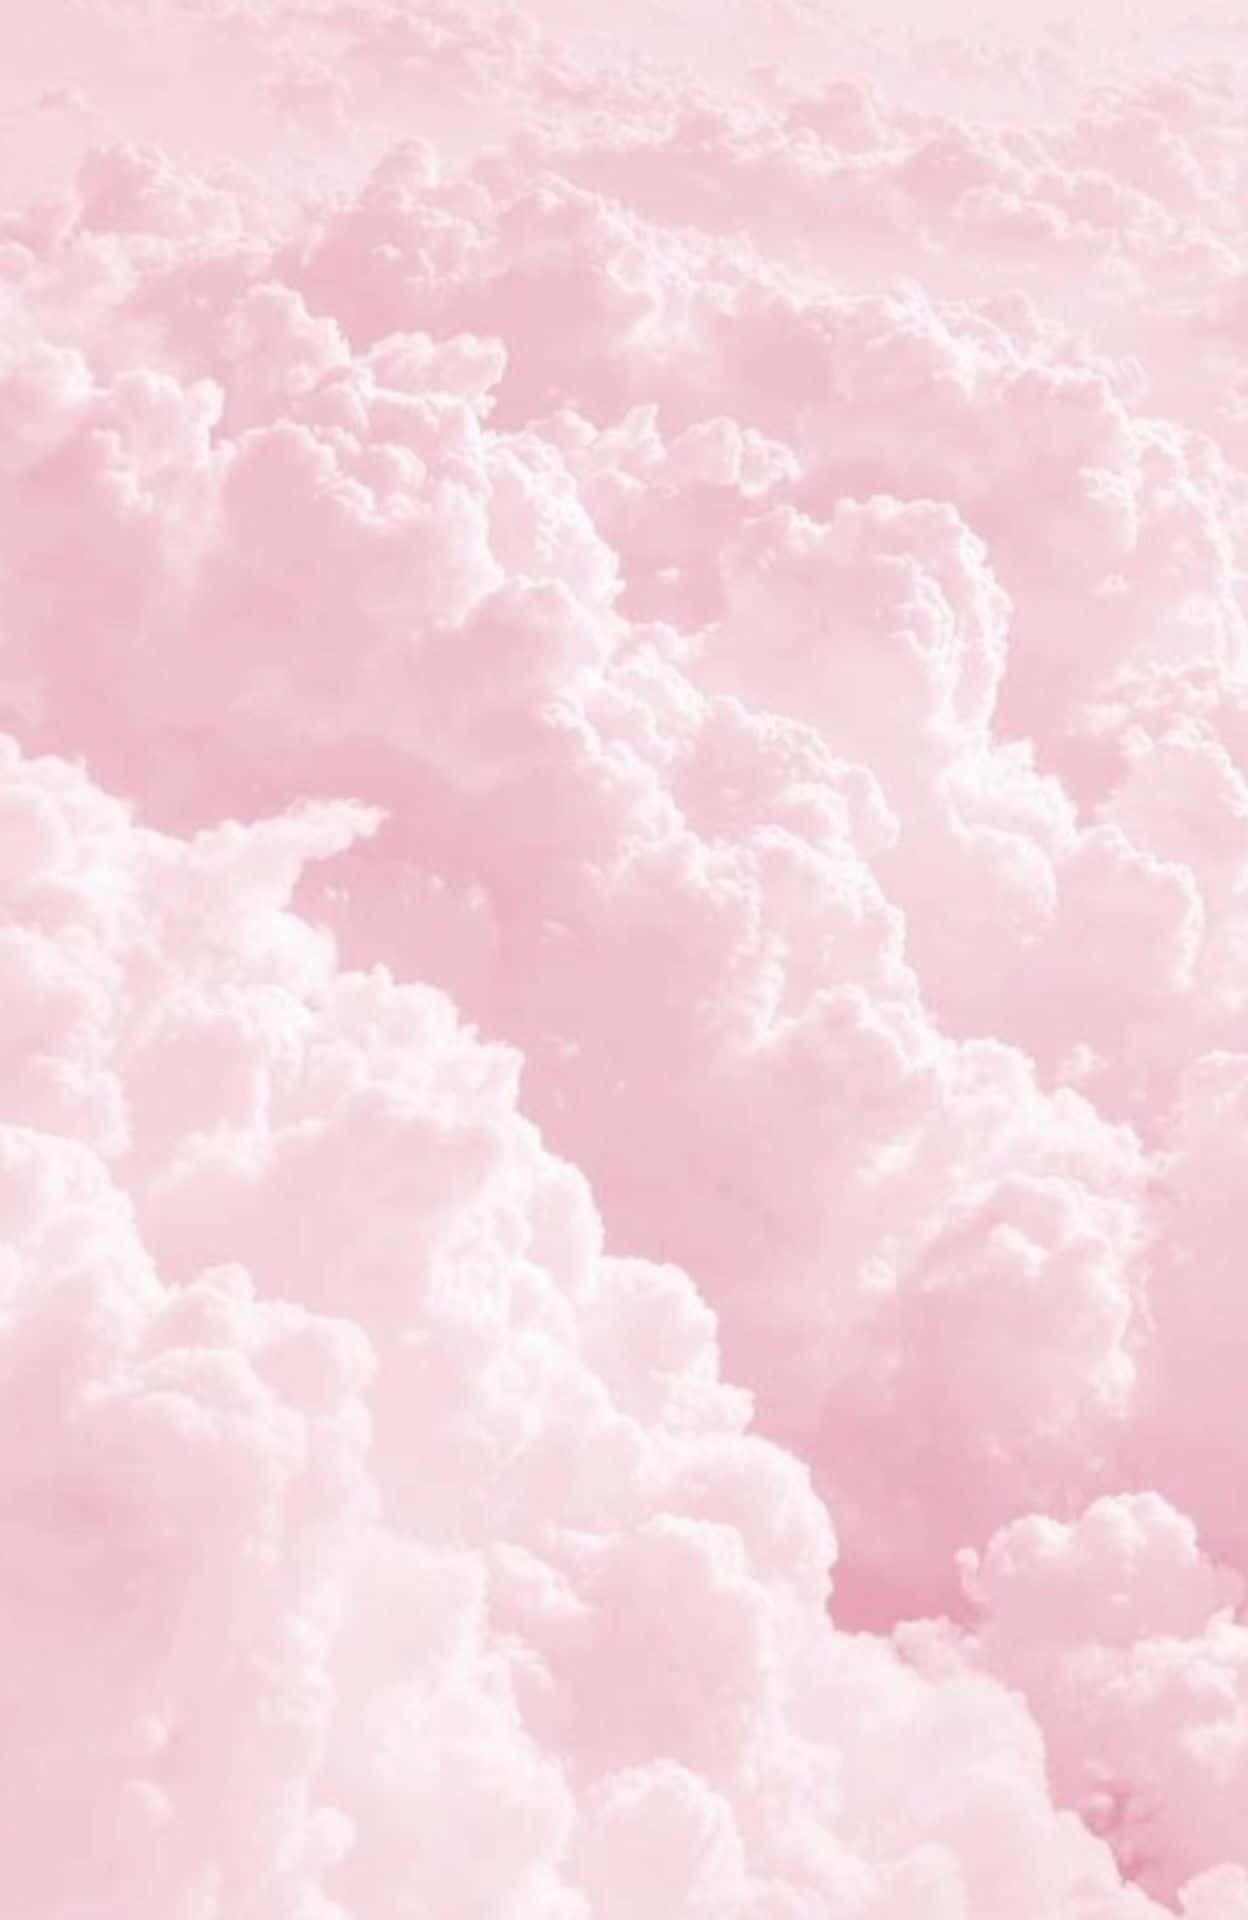 A beautiful cool pink background